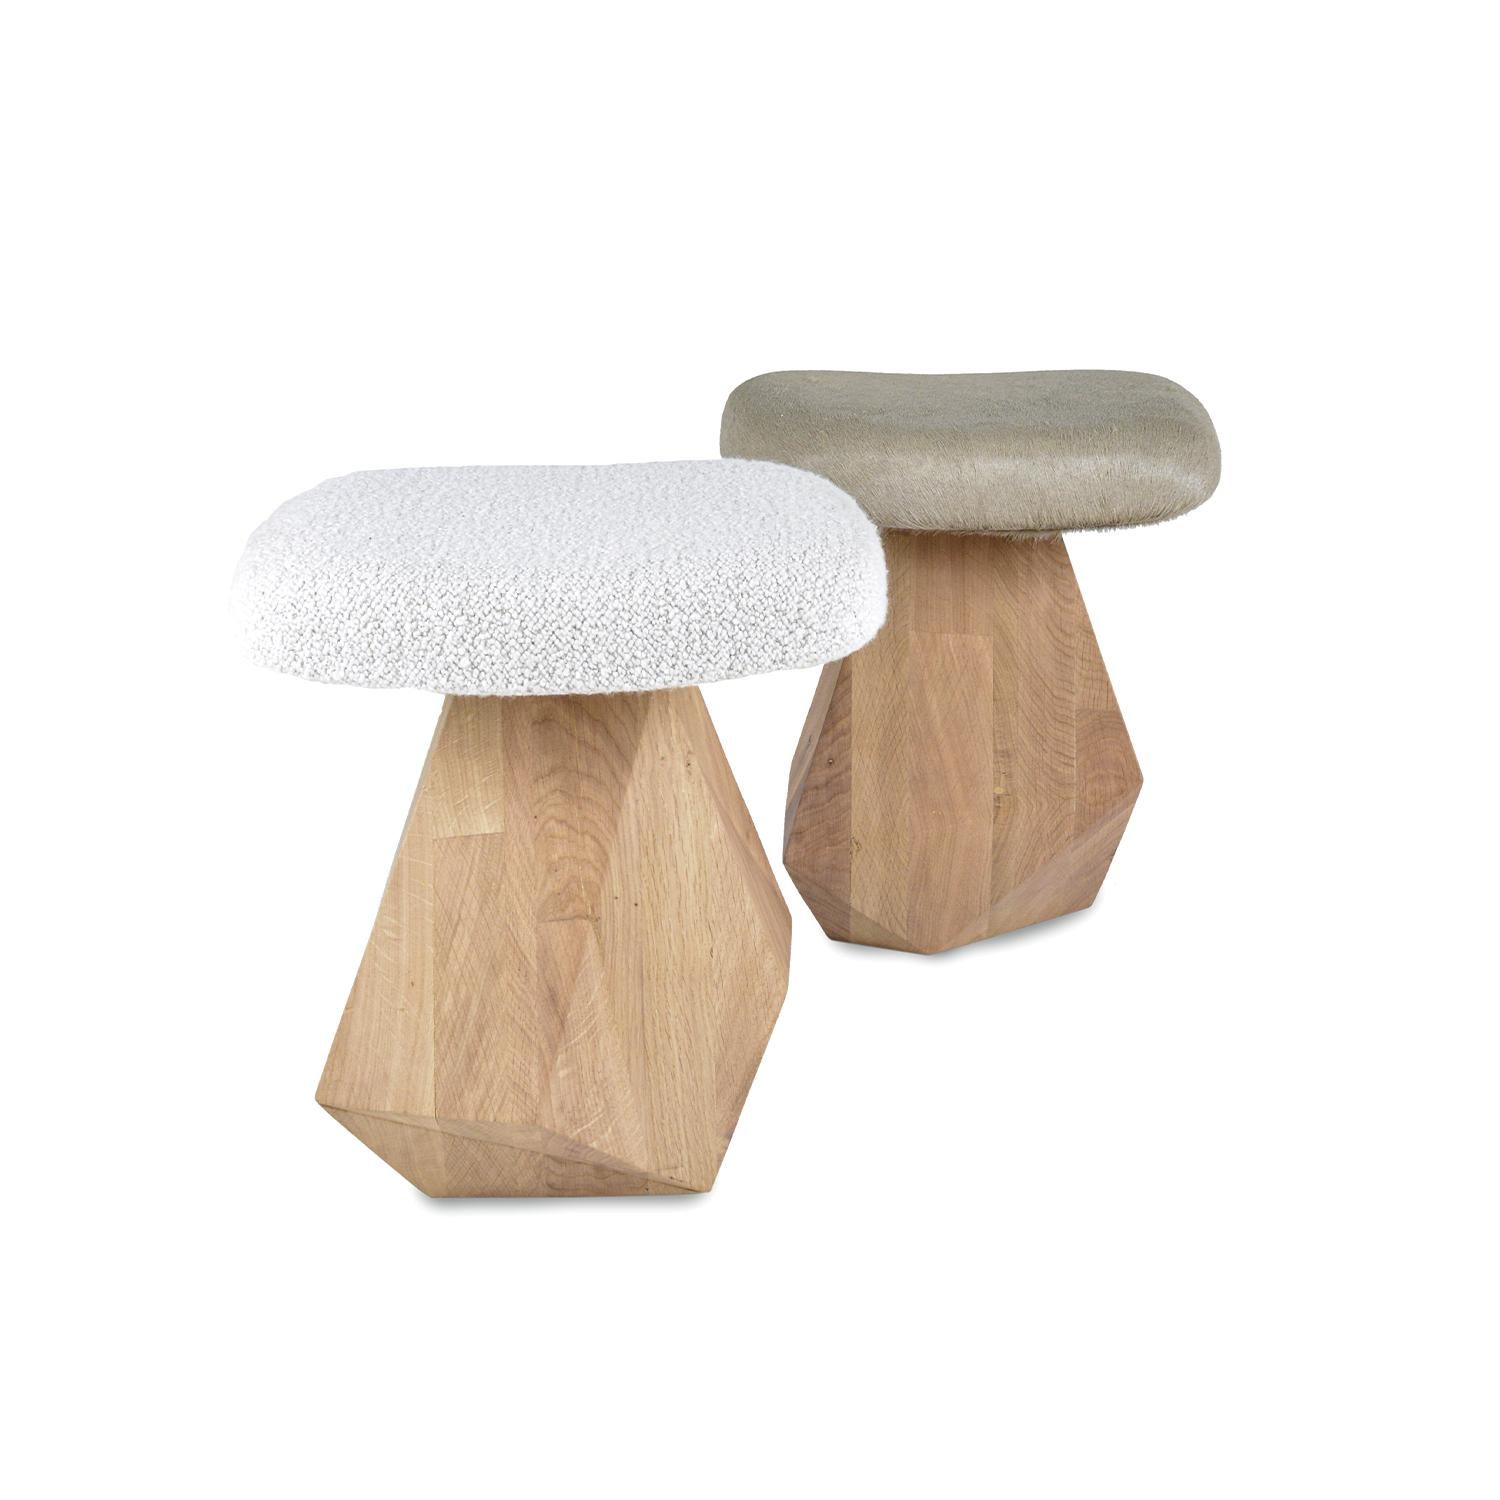 Dolmen Stool, Upholstery in Leather, Hand Carved Ash/Beech Base In New Condition For Sale In Fiscal Amares, PT